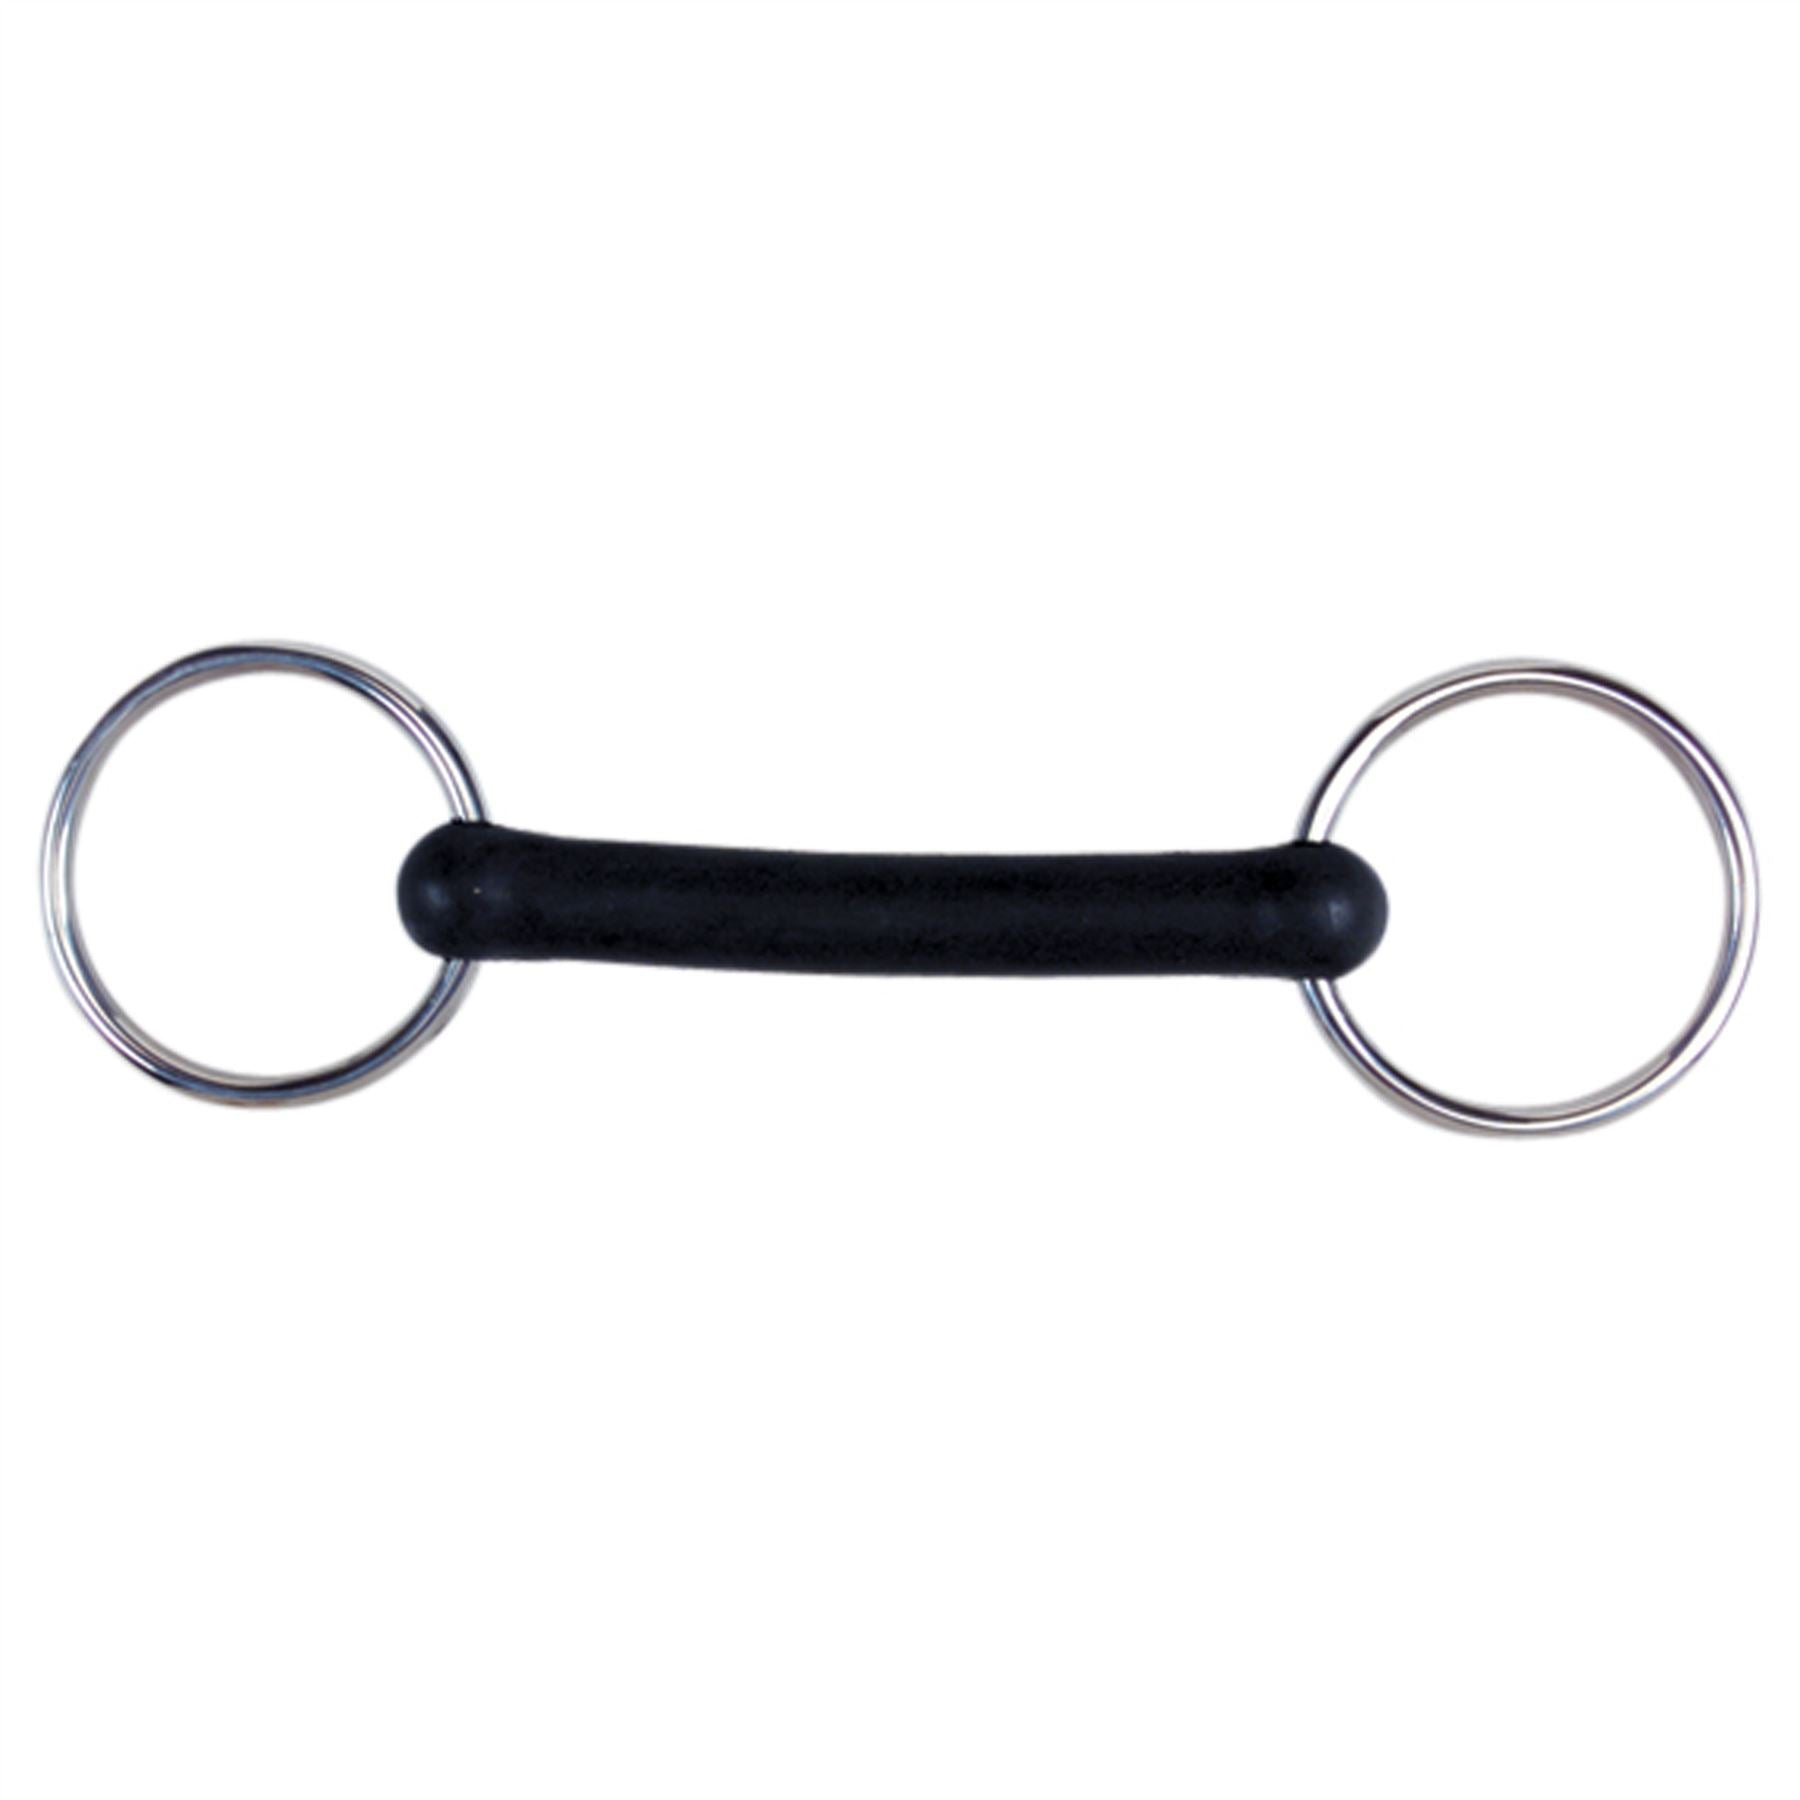 Korsteel Flexible Rubber Loose Ring Mullen Mouth Snaffle - Just Horse Riders